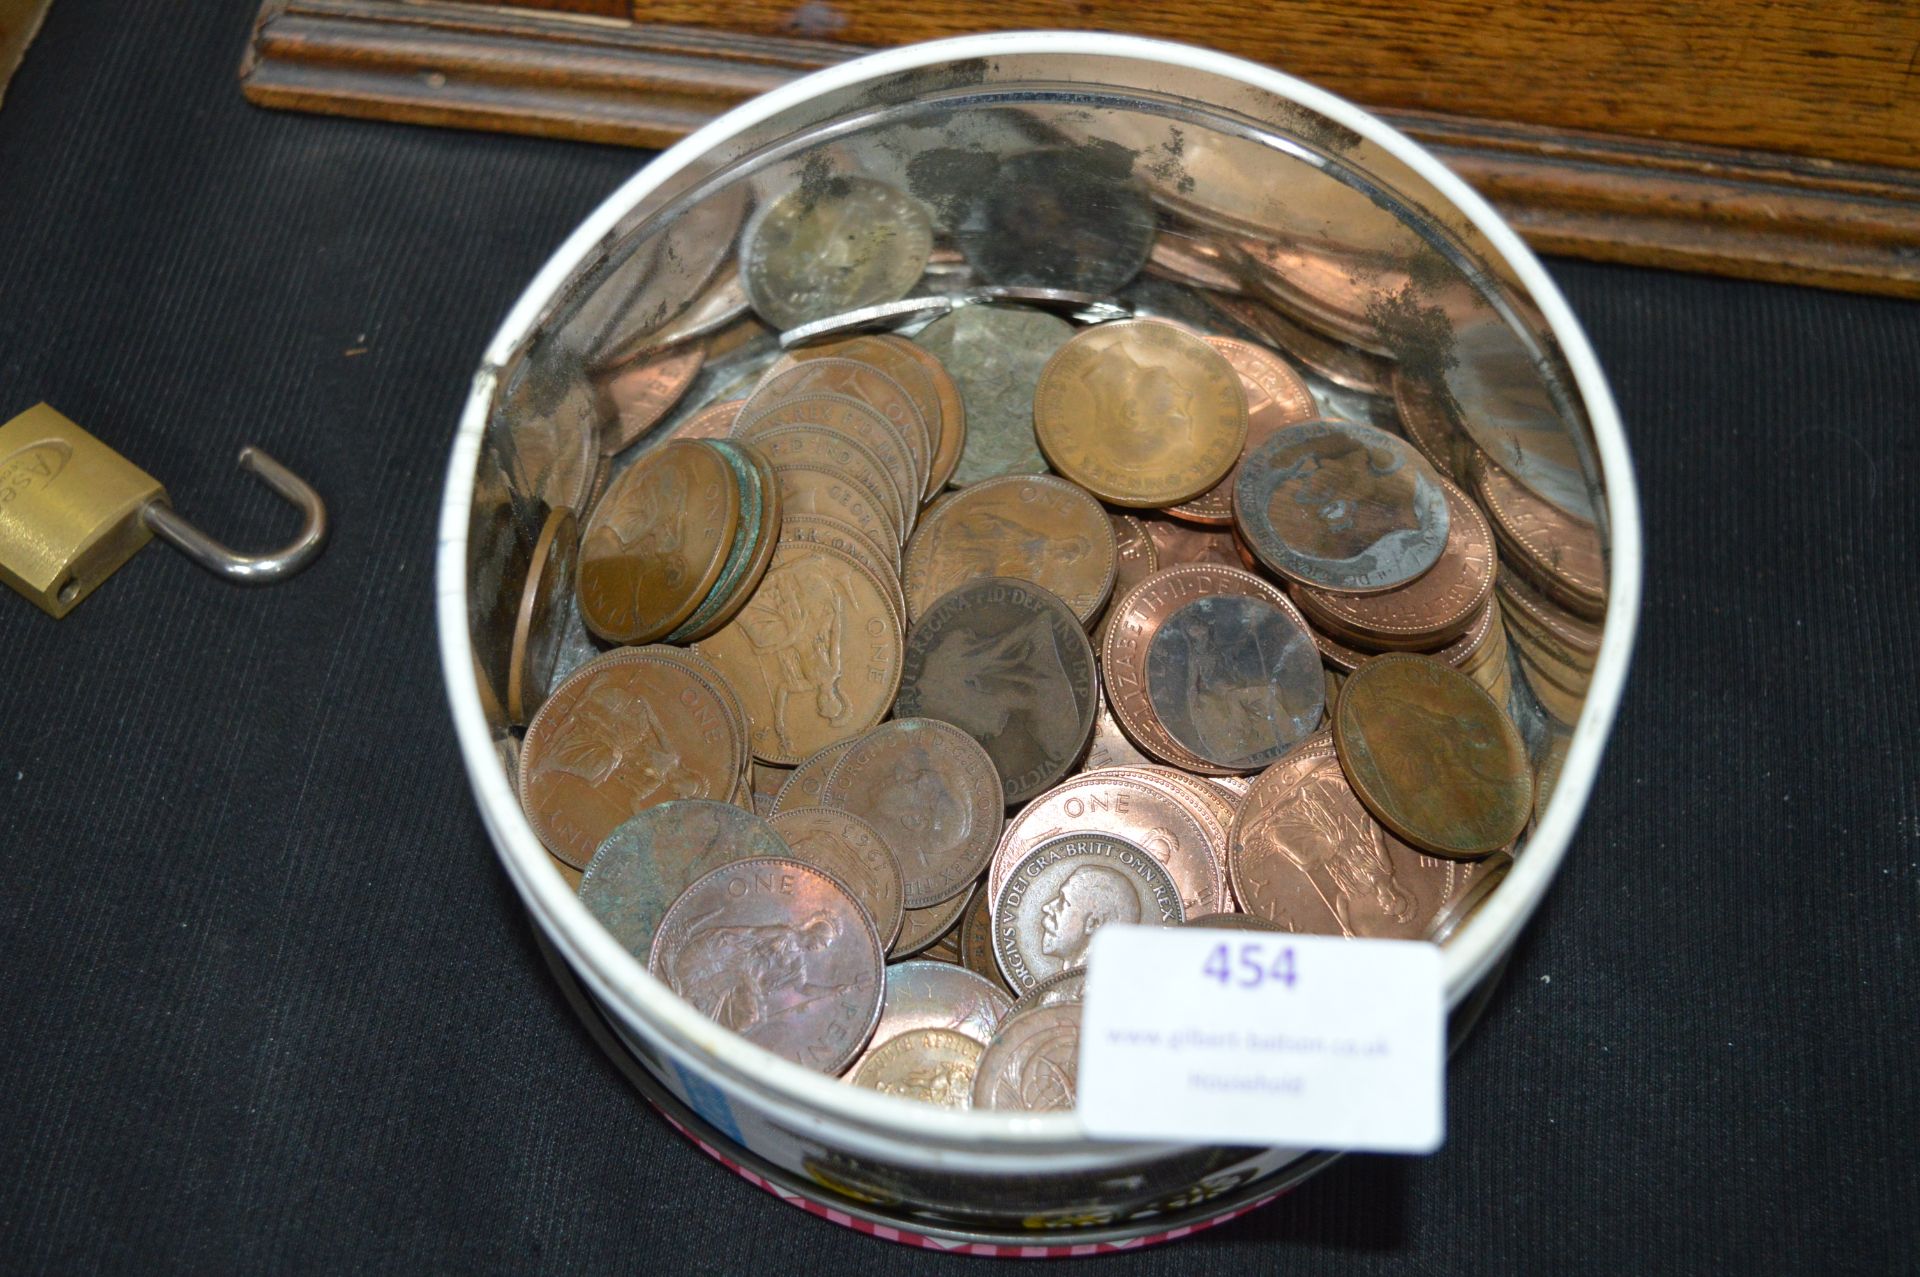 British Pennies and Other Currency